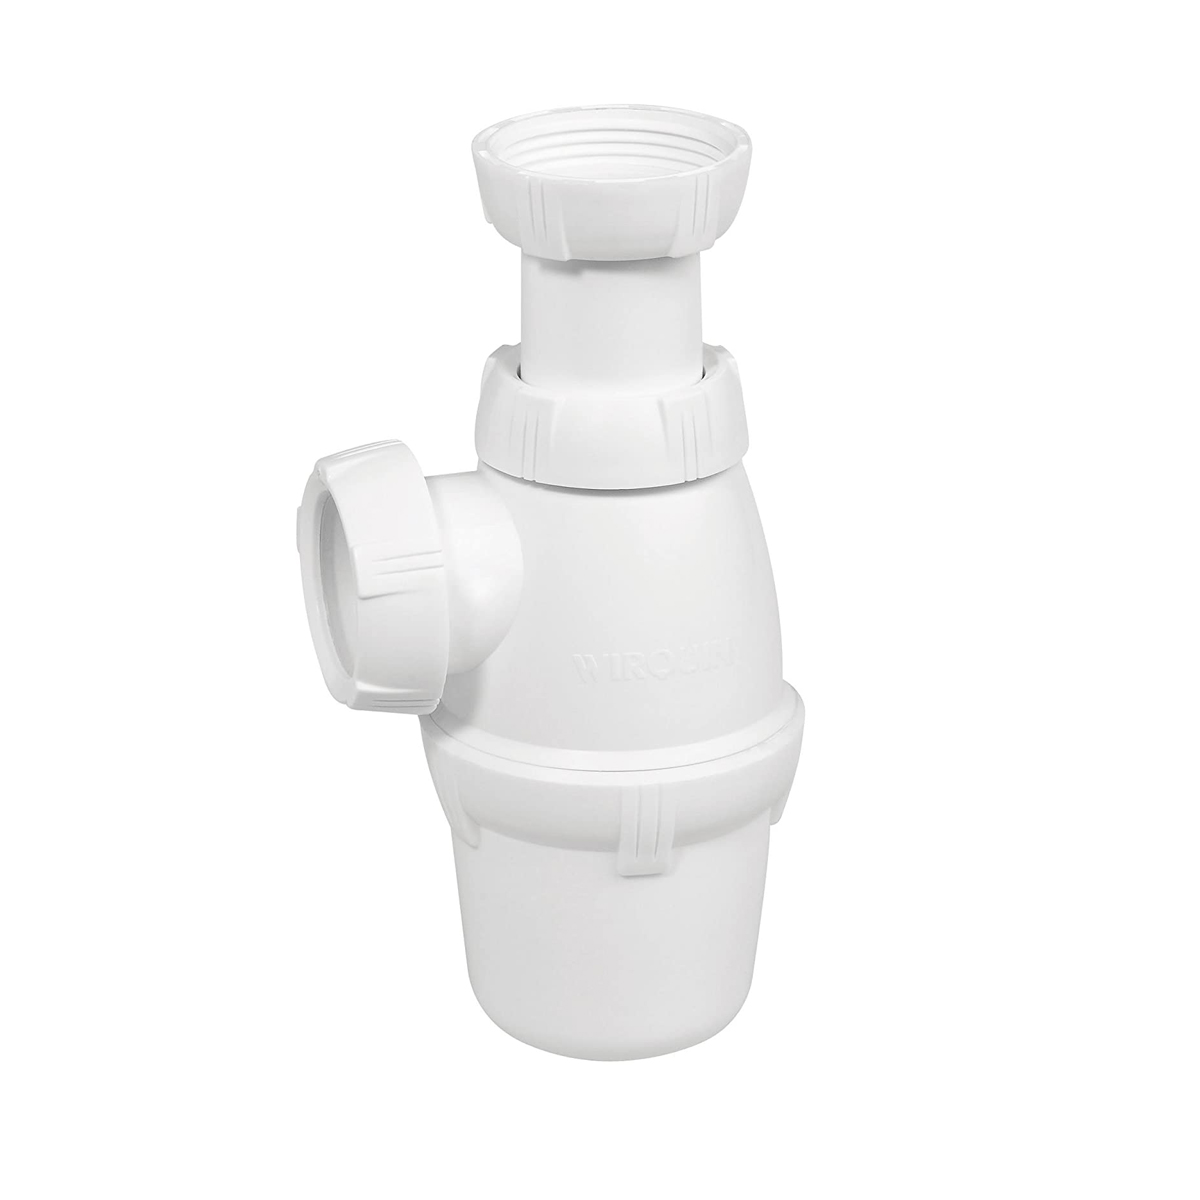 https://www.disconord.com/wp-content/uploads/2020/12/siphon-lavabo-sp3158.jpg